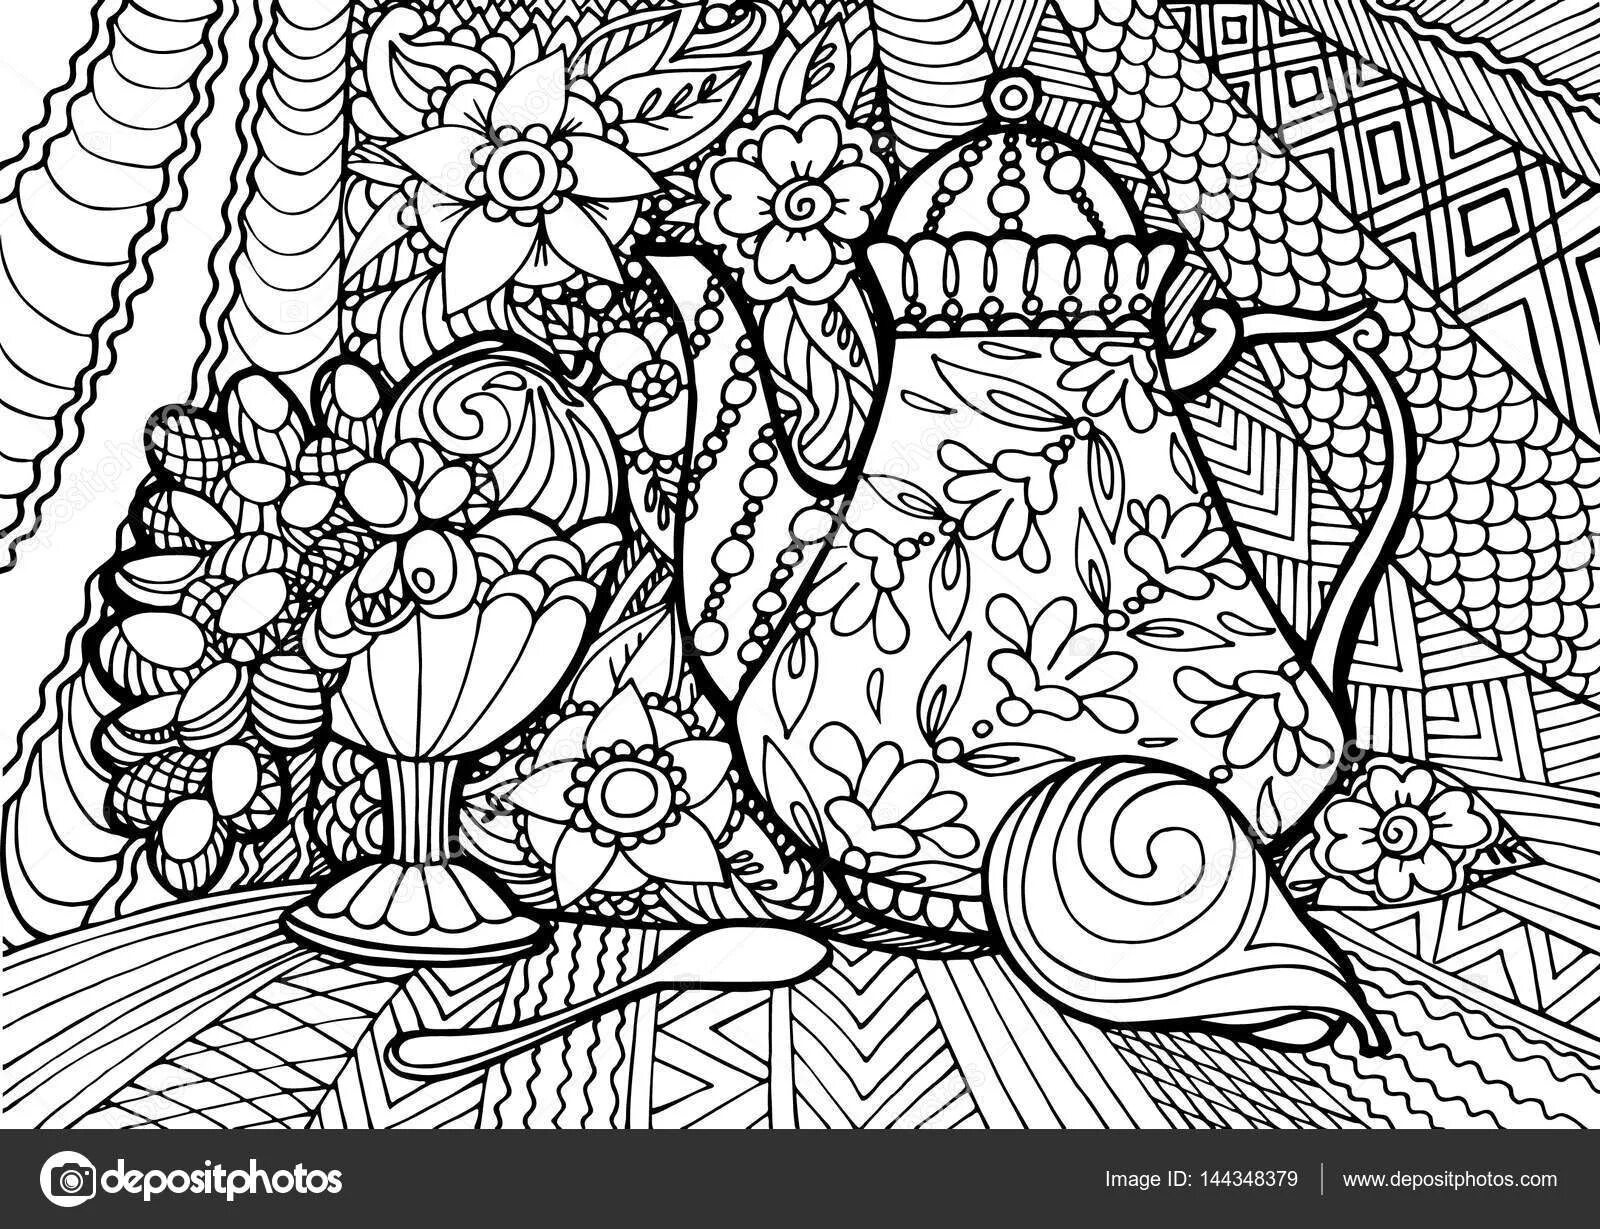 Coloring book luxury still life